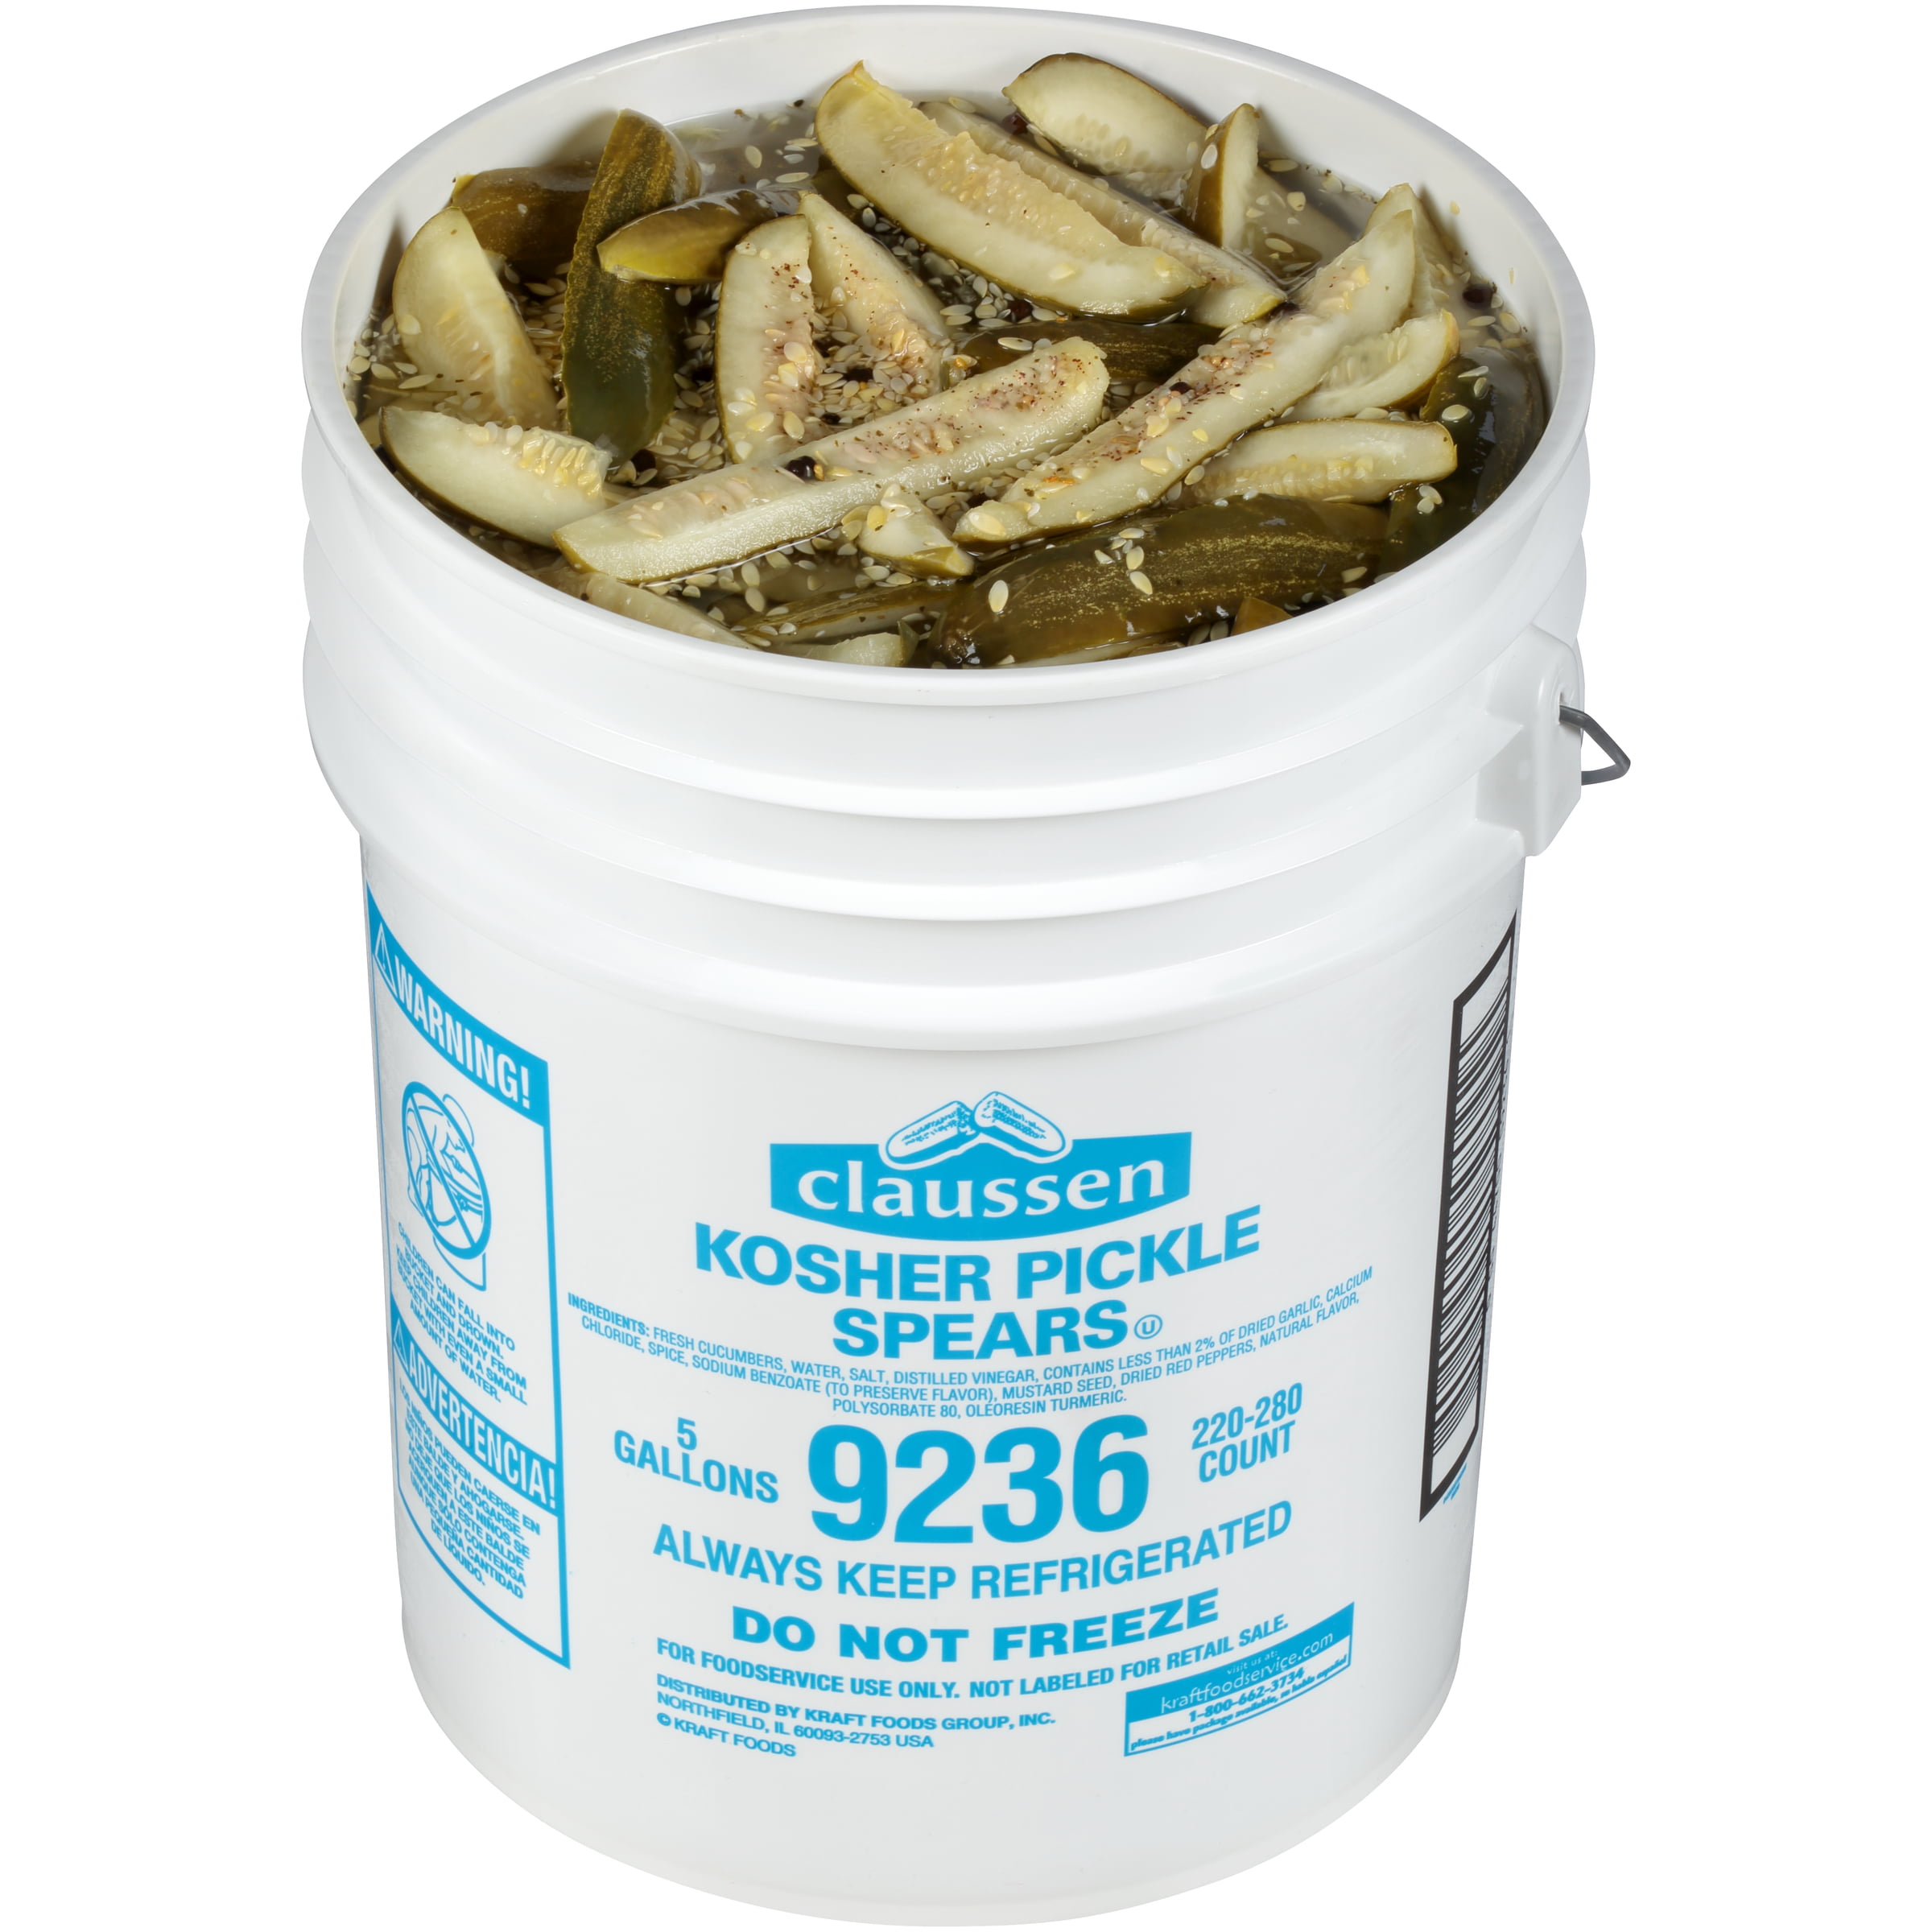 CLAUSSEN Dill Pickle Spears, 5 gal. Pail, 220-280 Count - Walmart.com 5 Gallon Bucket Of Sliced Pickles